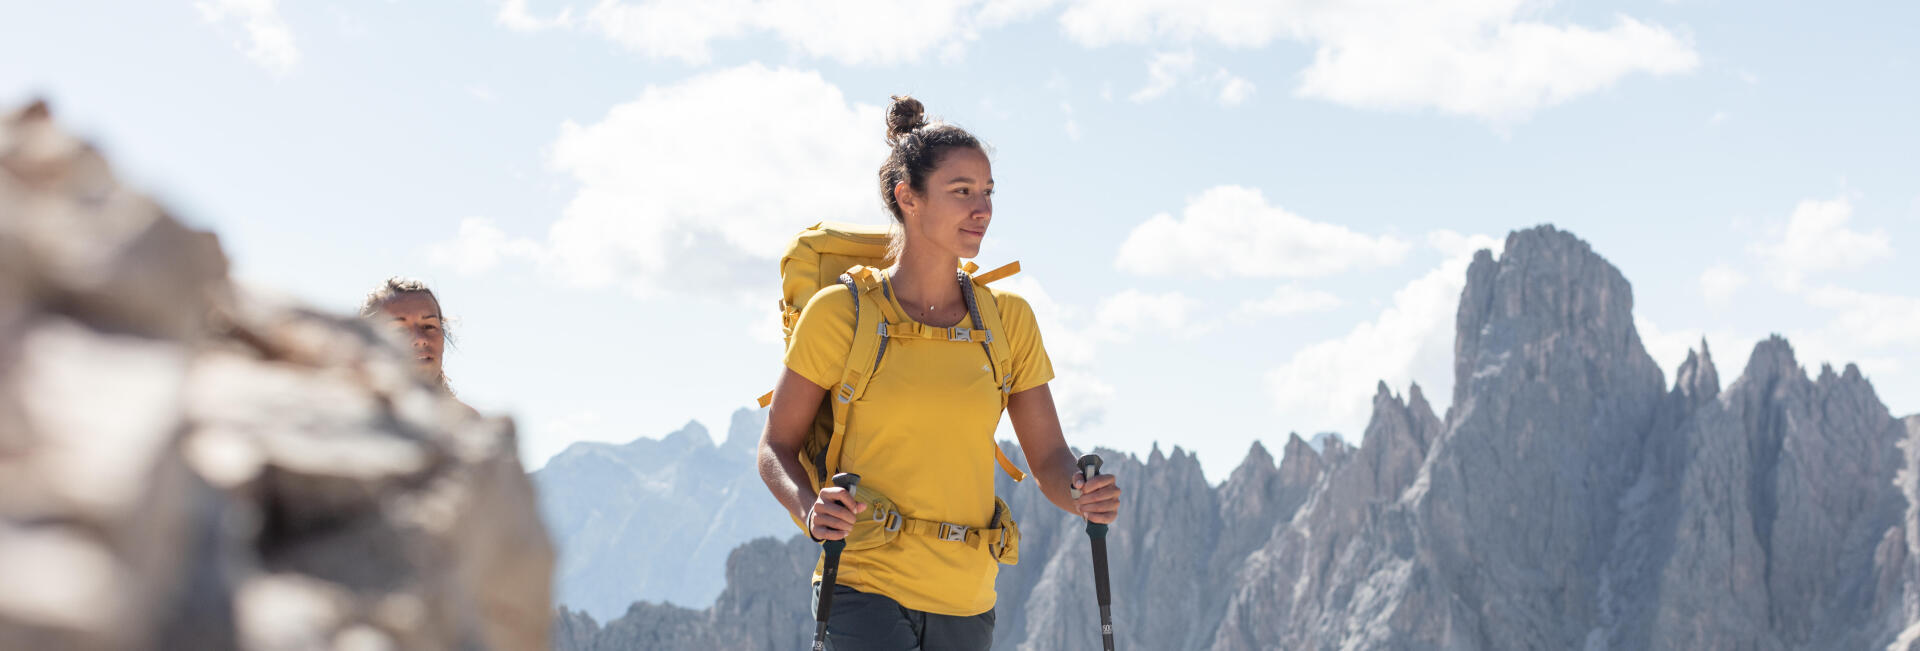 7 tips to overcome the fear of heights when hiking